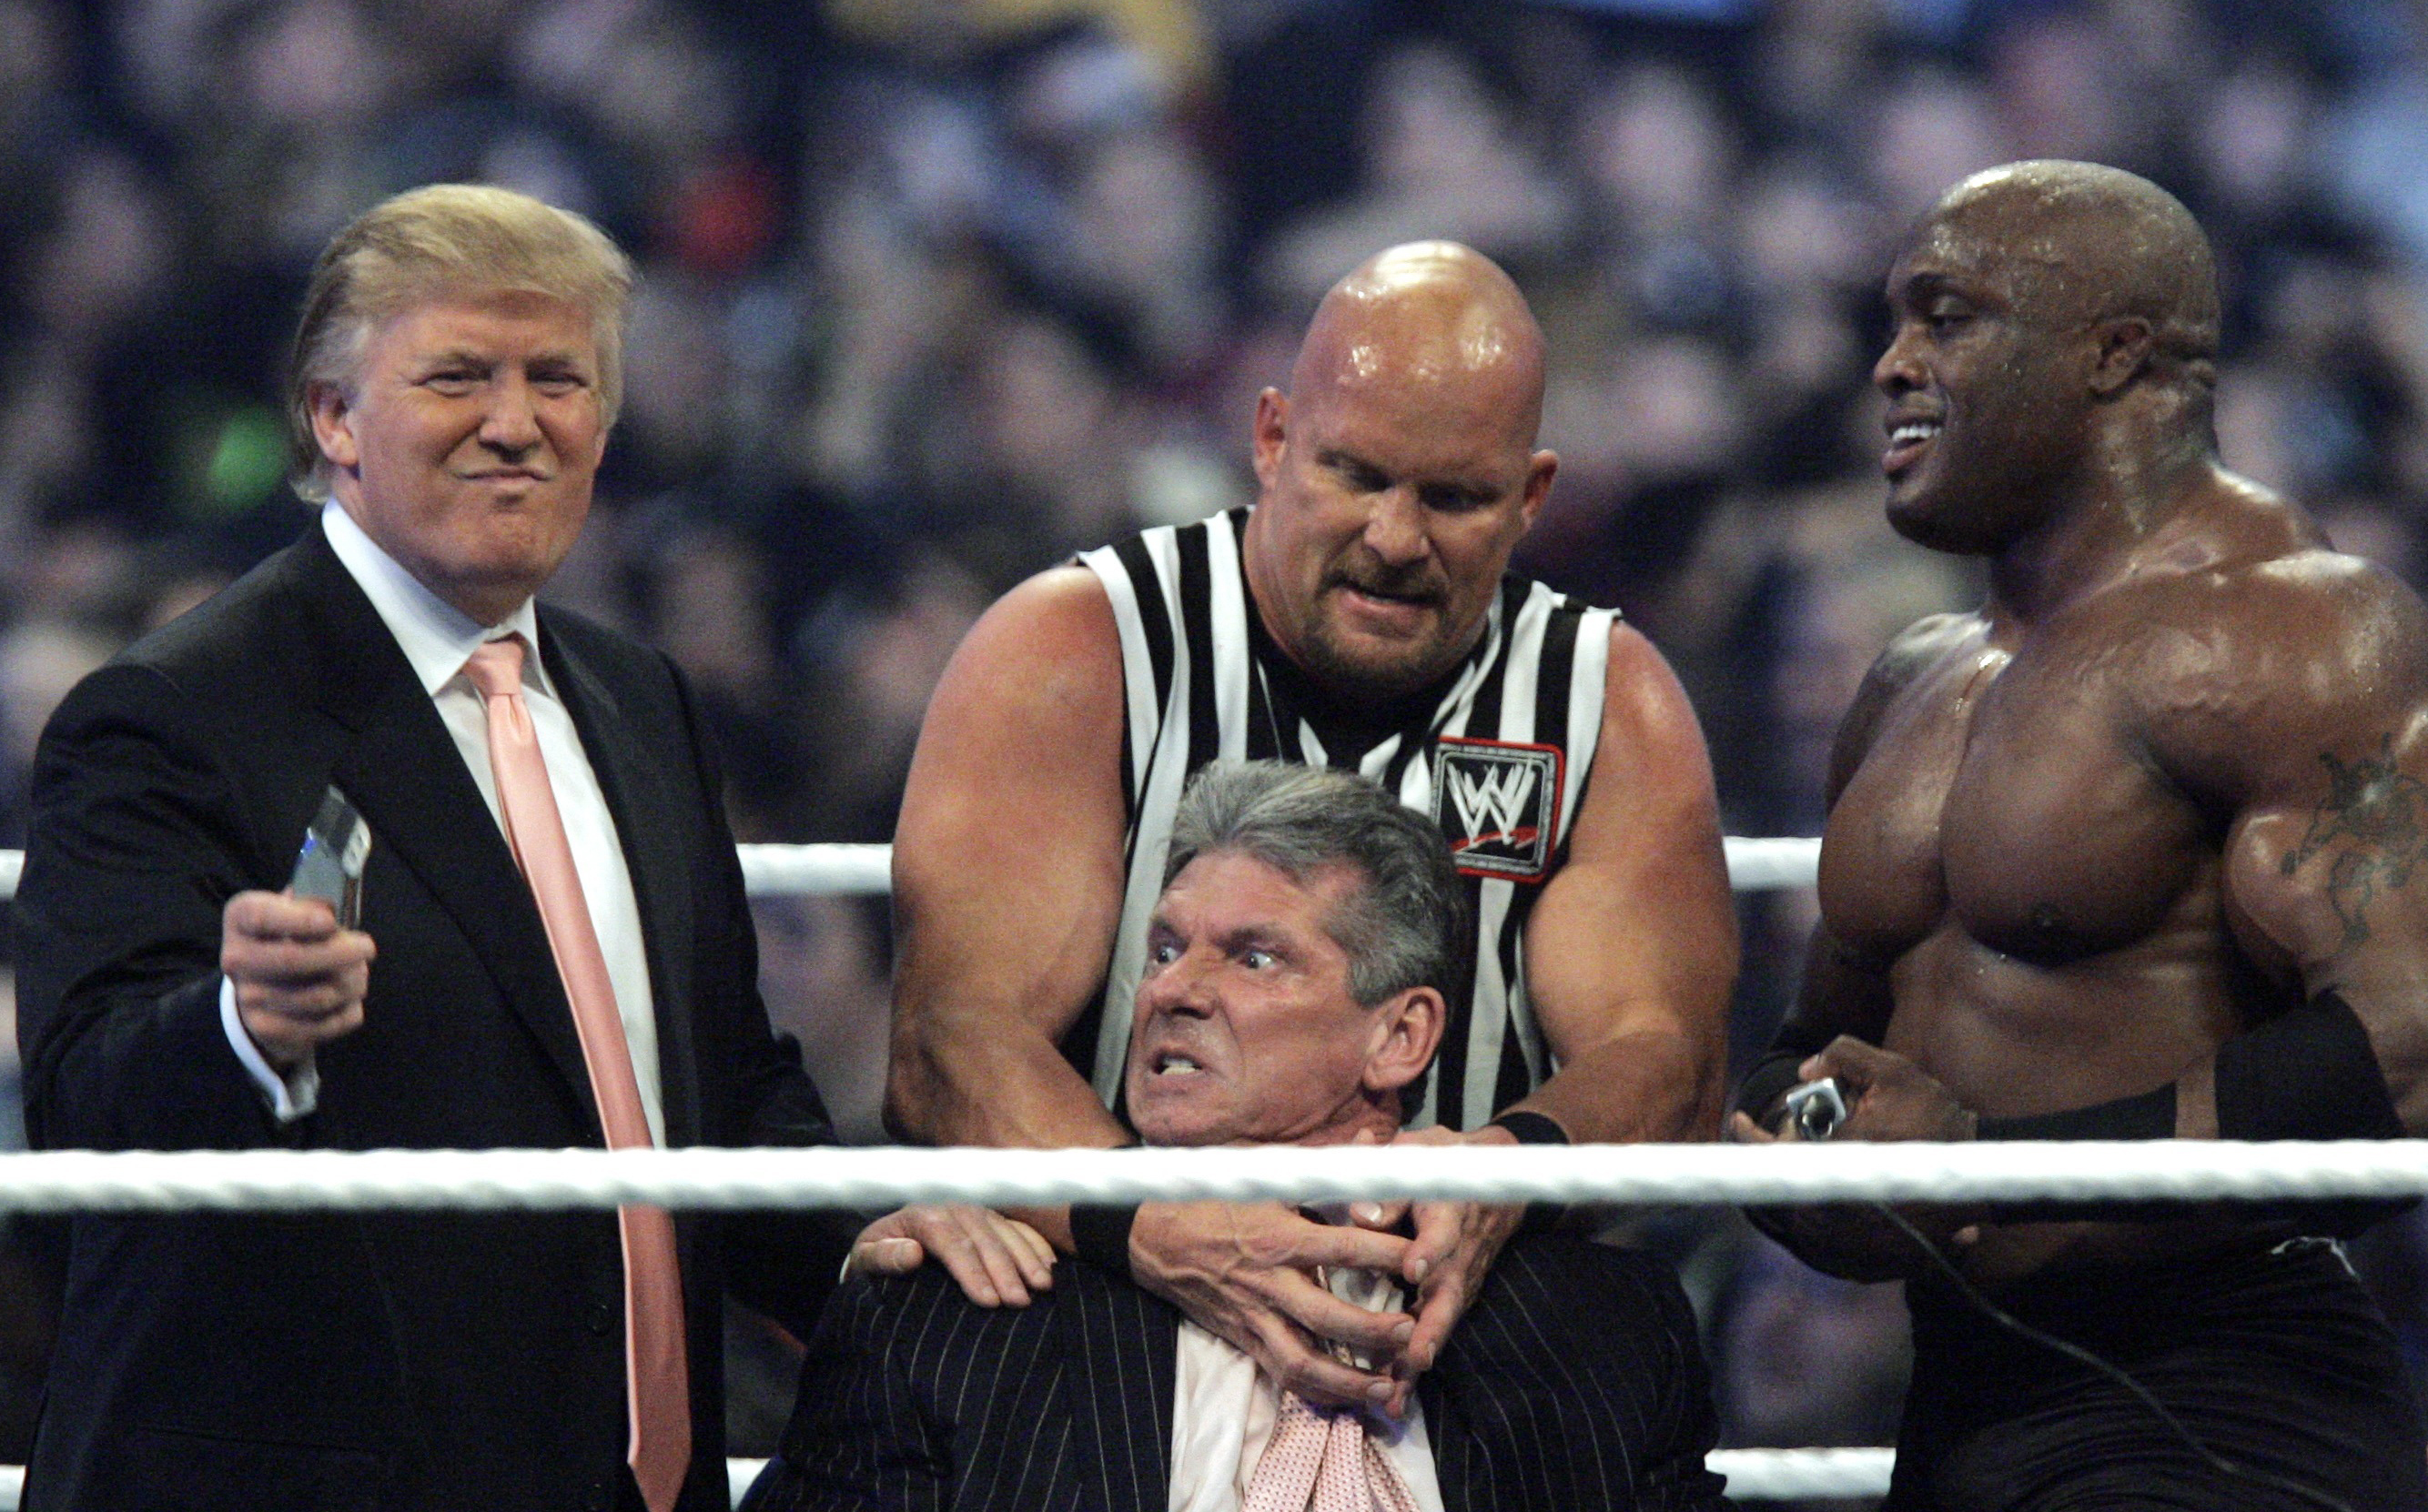 FILE - In this Sunday, April 1, 2007, file photo, WWE Chairman Vince McMahon, center, held by "Stone Cold" Steve Austin, prepares to have his hair cut off by Donald Trump, left, and Bobby Lashley, right, after Lashley defeated Umaga at Wrestlemania 23 at Ford Field in Detroit. 